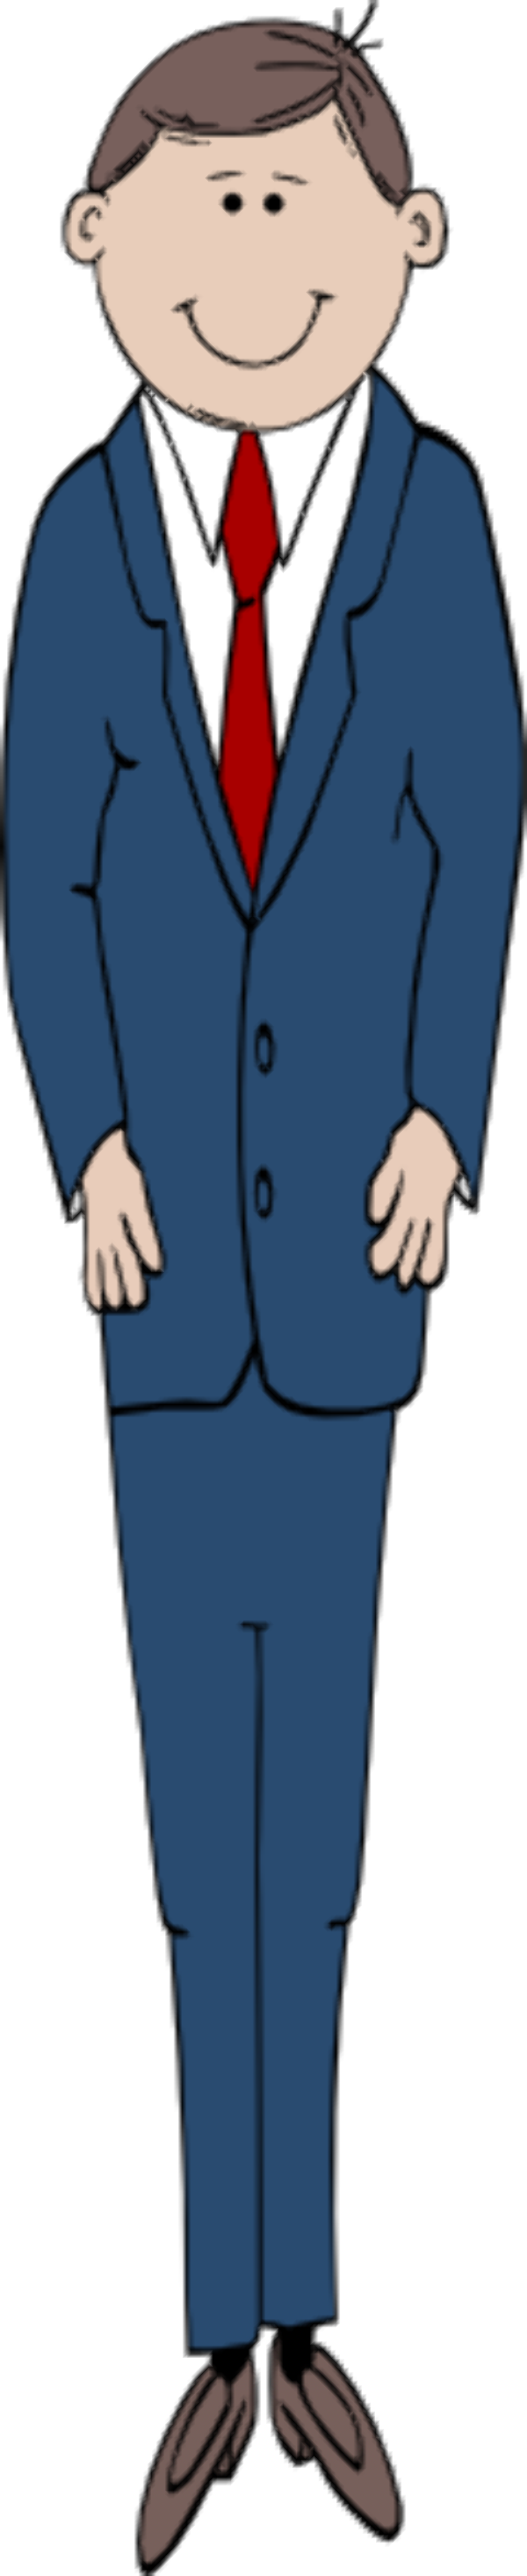 Download High Quality People clipart tall man Transparent PNG Images